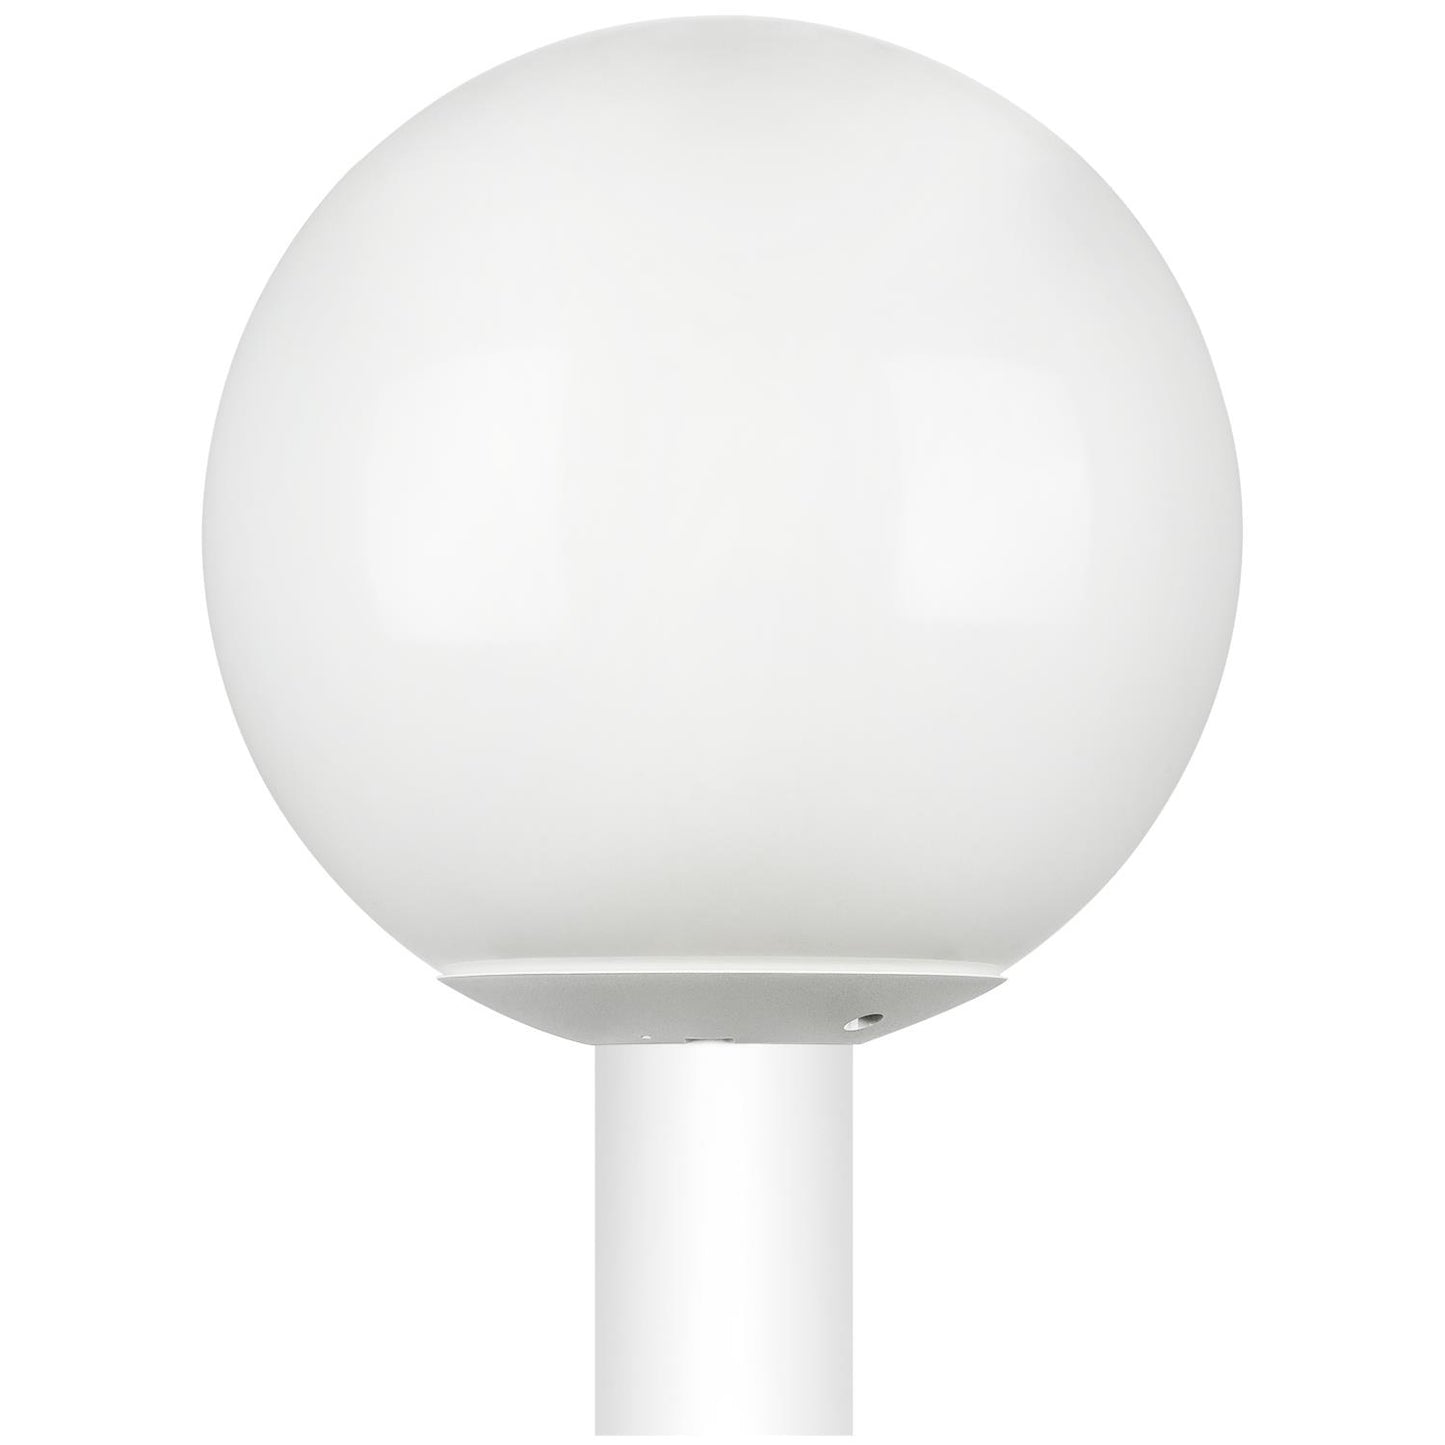 Sunlite 12" Decorative Outdoor Neckless Globe Polycarbonate Post Fixture, White Finish, White Lens, 3" Post Mount (not included)